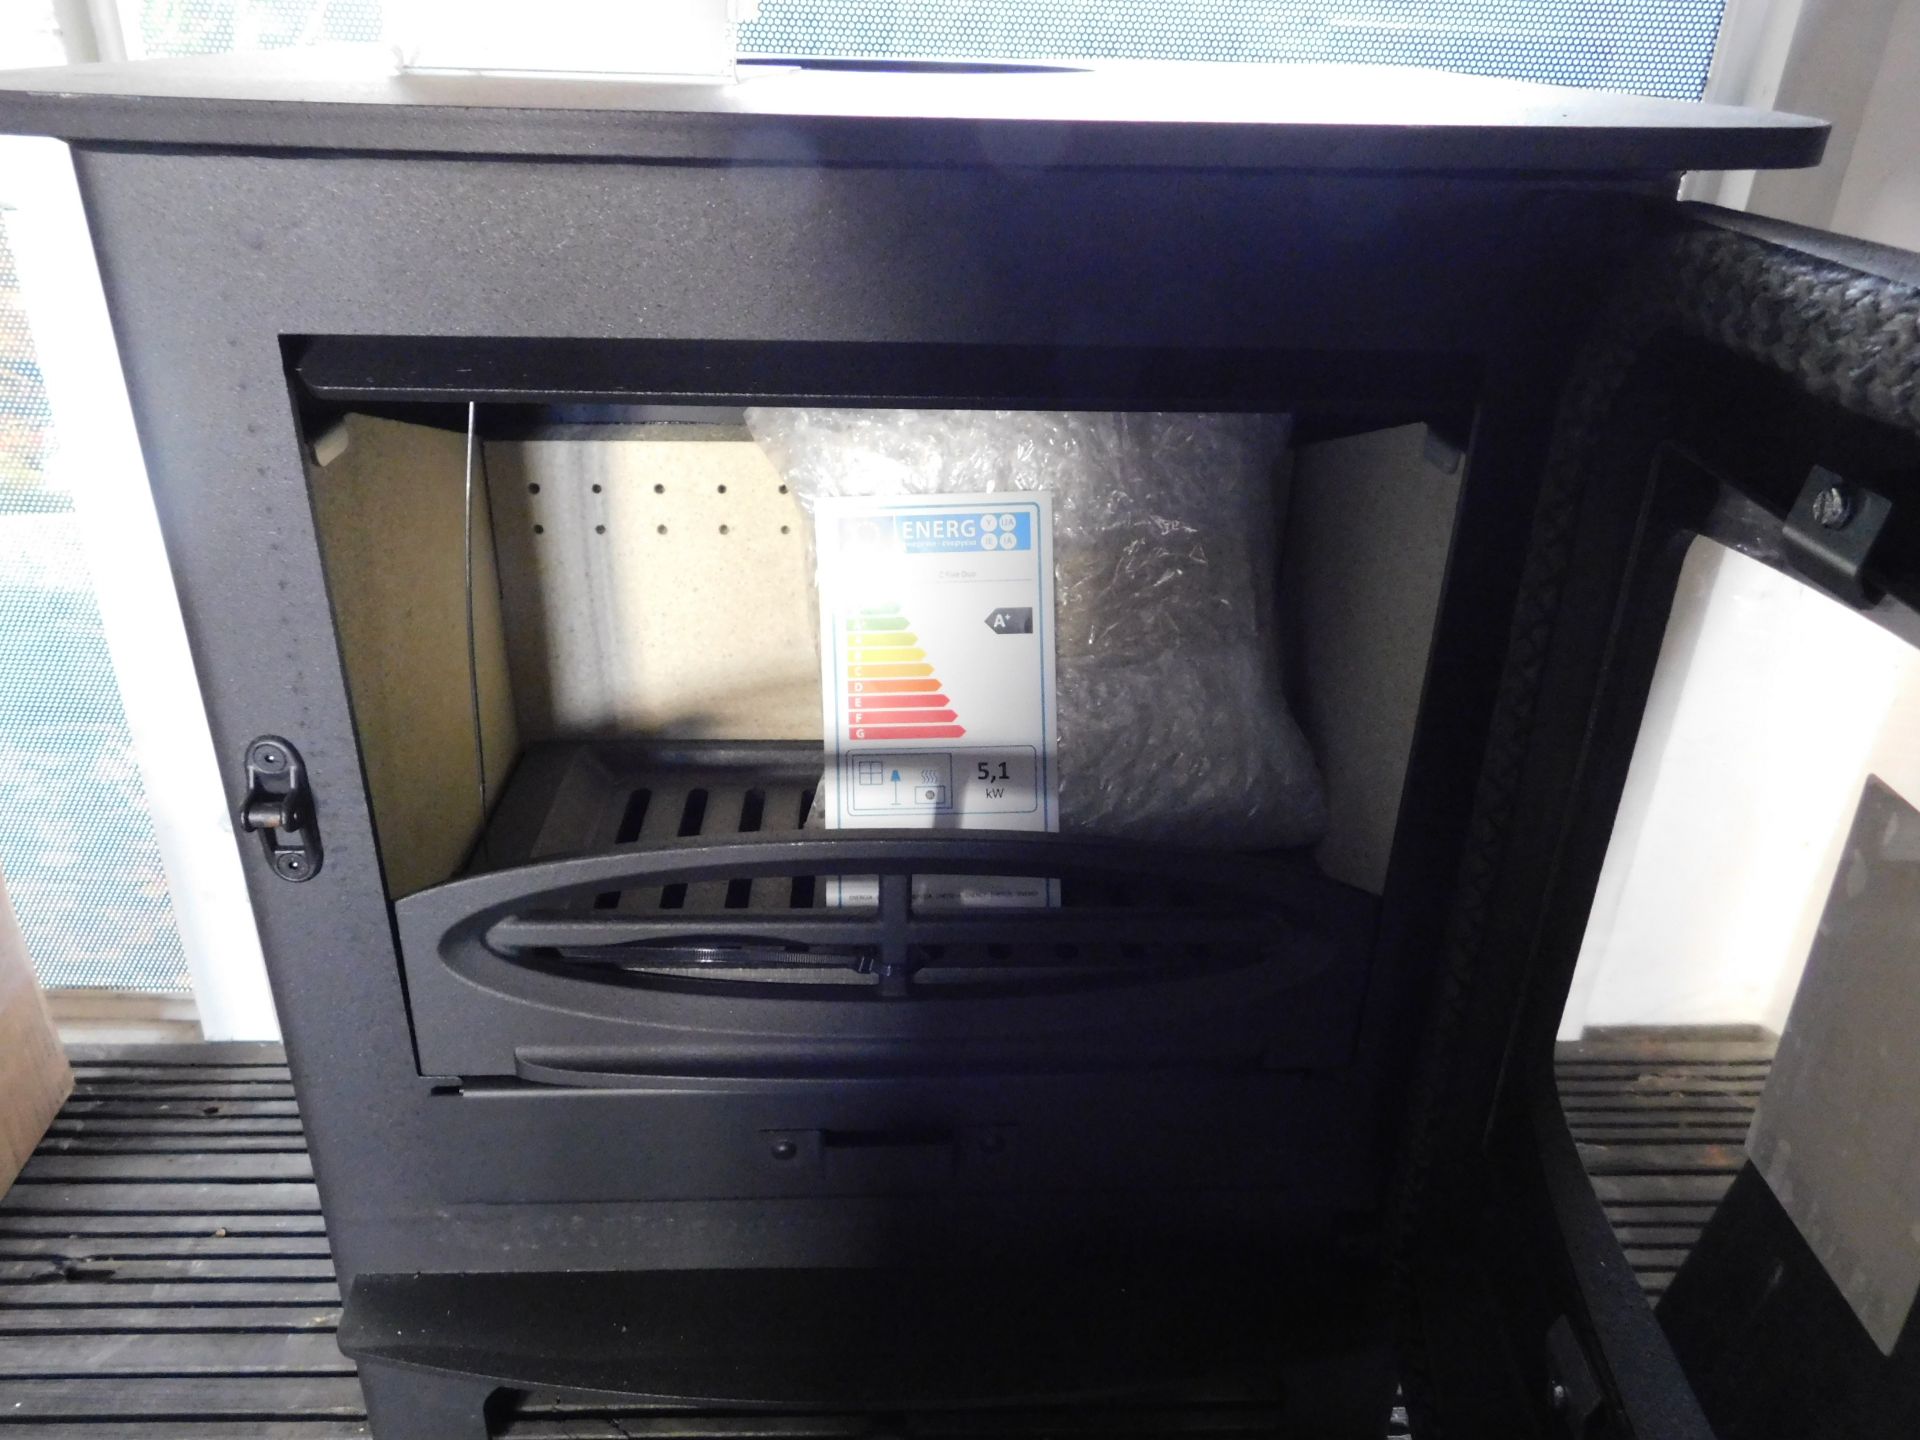 Ex-Display Charnwood “C5 Duo” 5kw Multifuel Woodburning Stove (Where the company’s description/price - Image 2 of 3